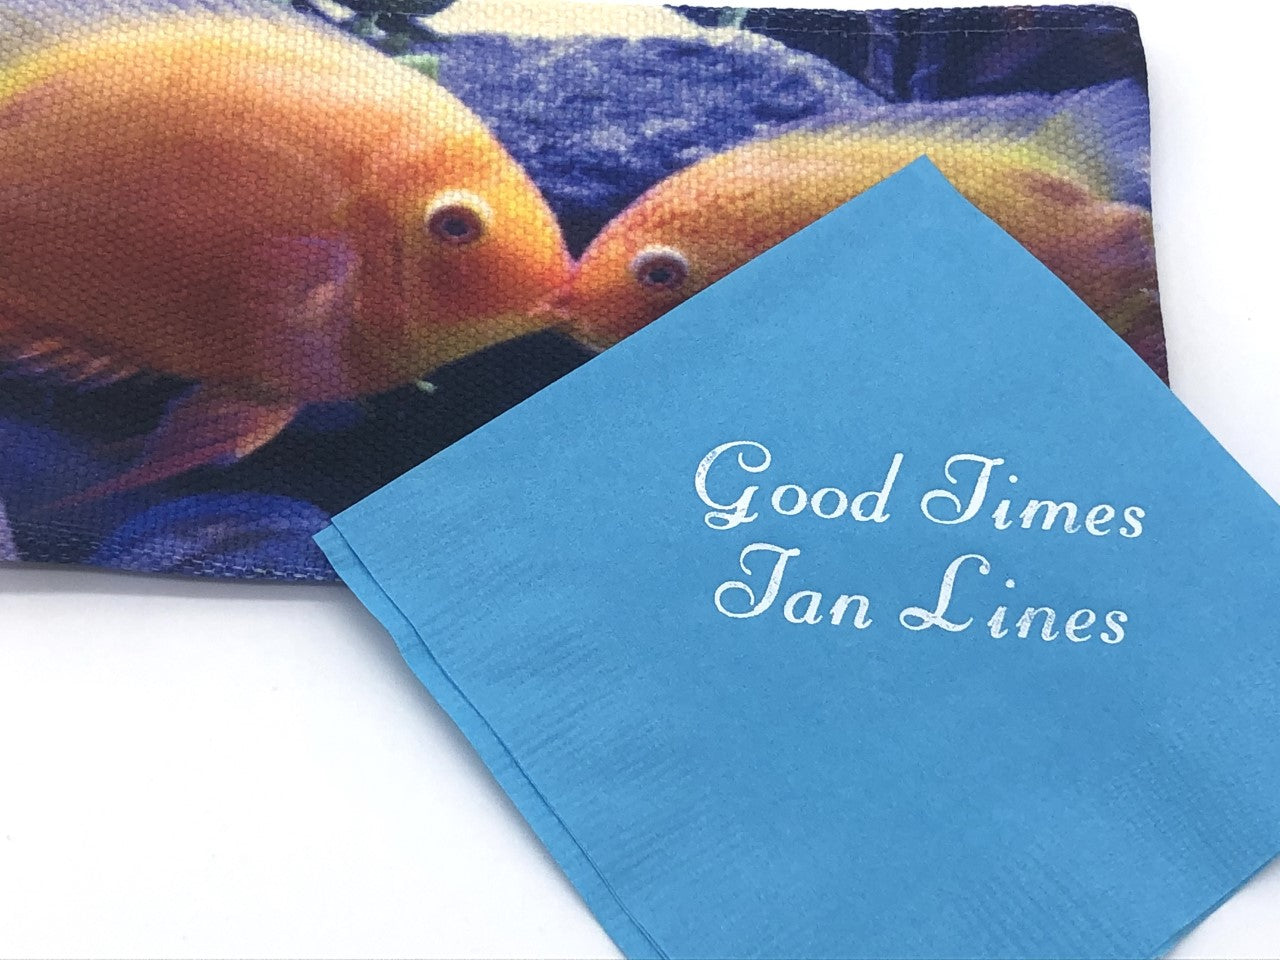 Light Blue cocktail napkin with silver Good Times Tan Lines slogan